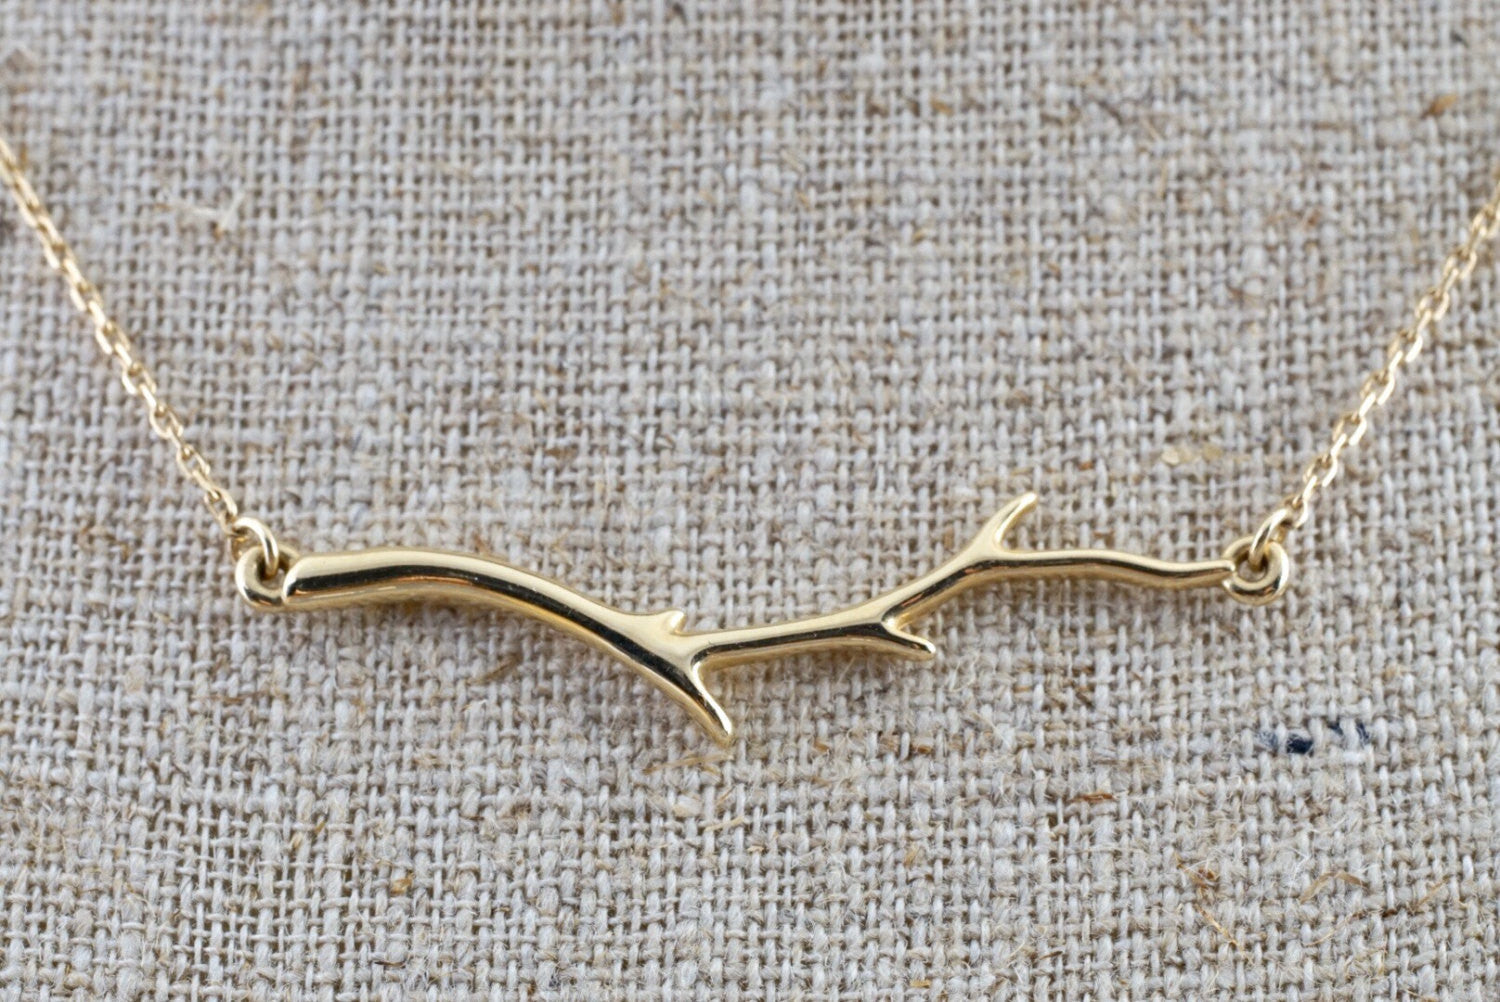 14k Yellow Gold Branch Necklace Pendant Leaf